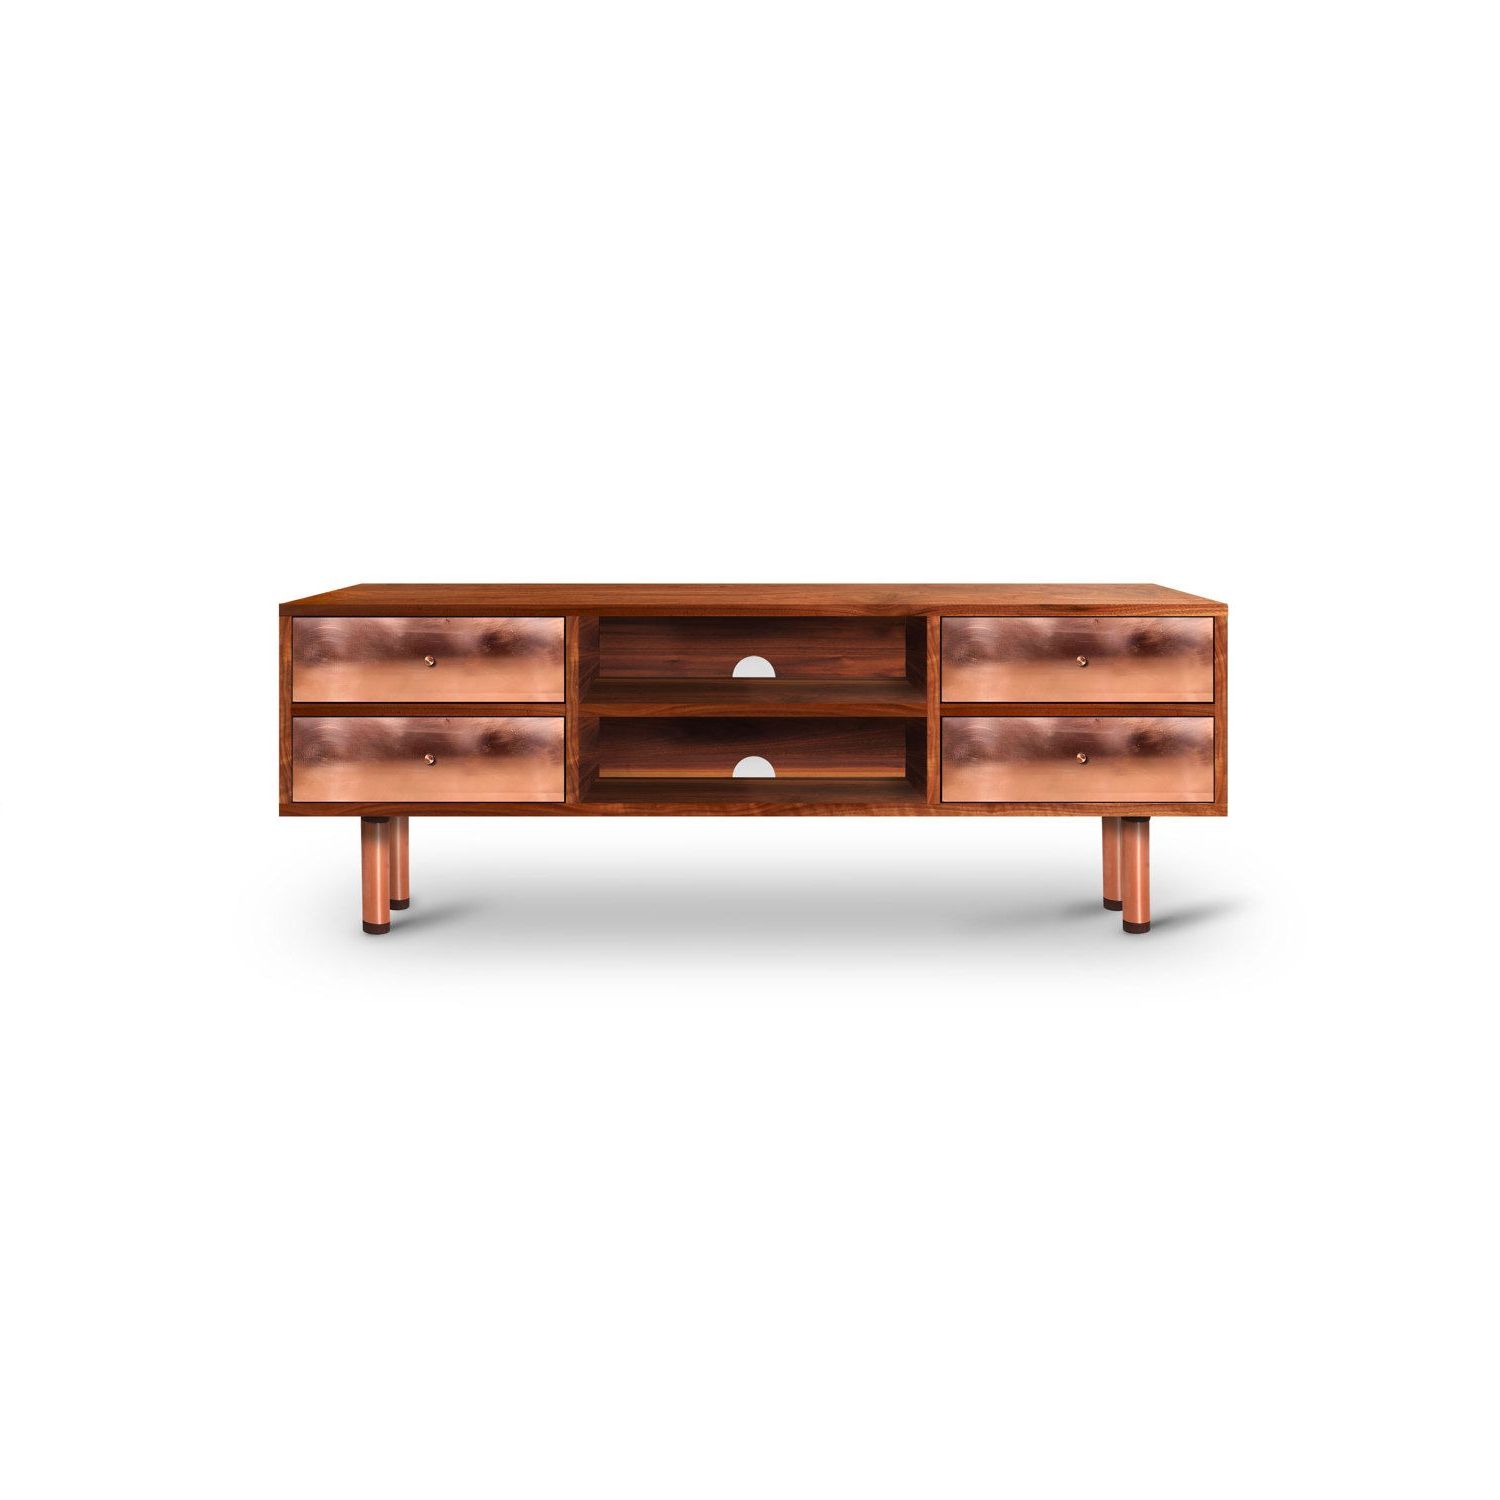 Natural Cane Media Console Tables Inside Most Up To Date Mid Century Modern Brooklyn Media Console In Walnut, Copper Or Brass (View 10 of 20)